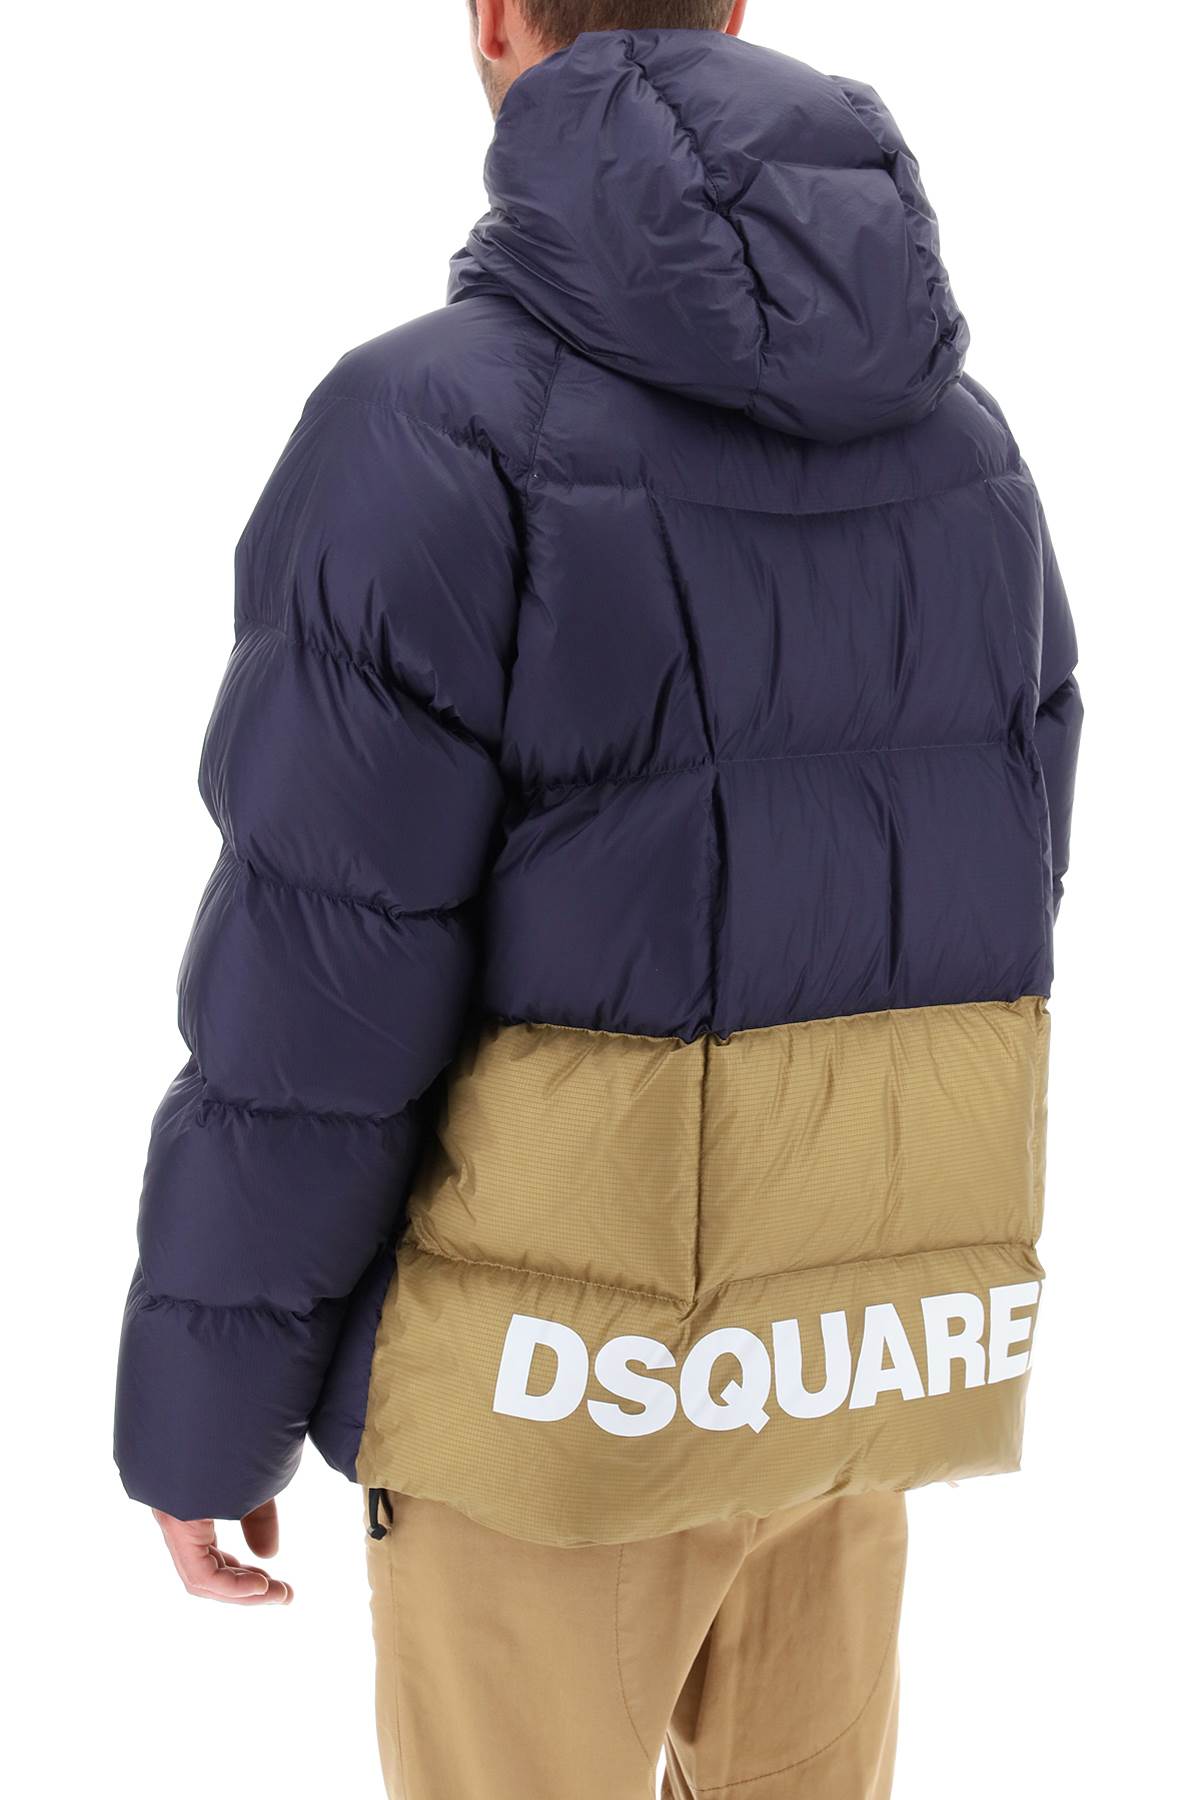 Dsquared2 Dsquared2 logo print hooded down jacket